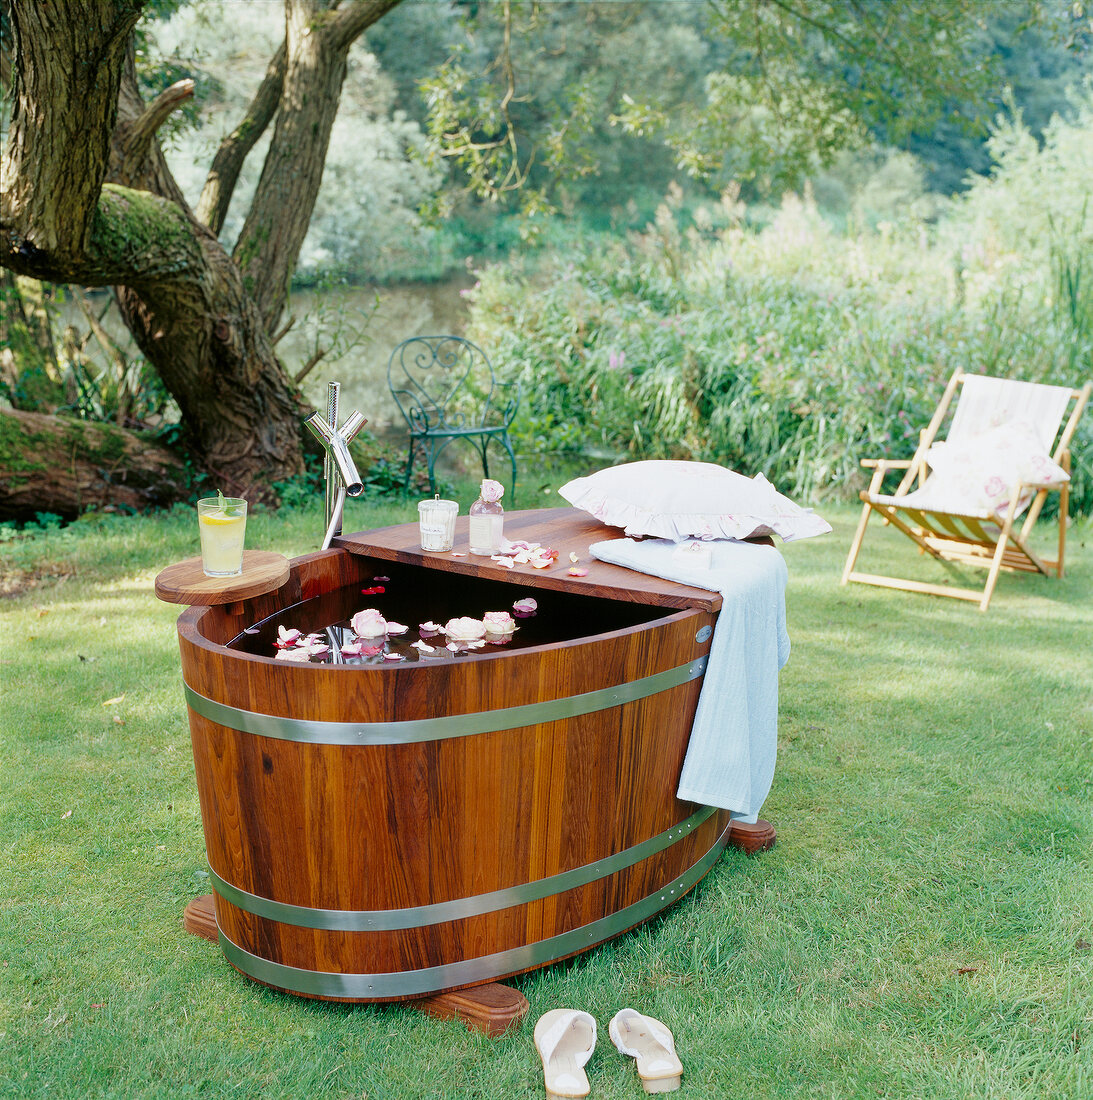 Wooden tub with floating flowers in the garden